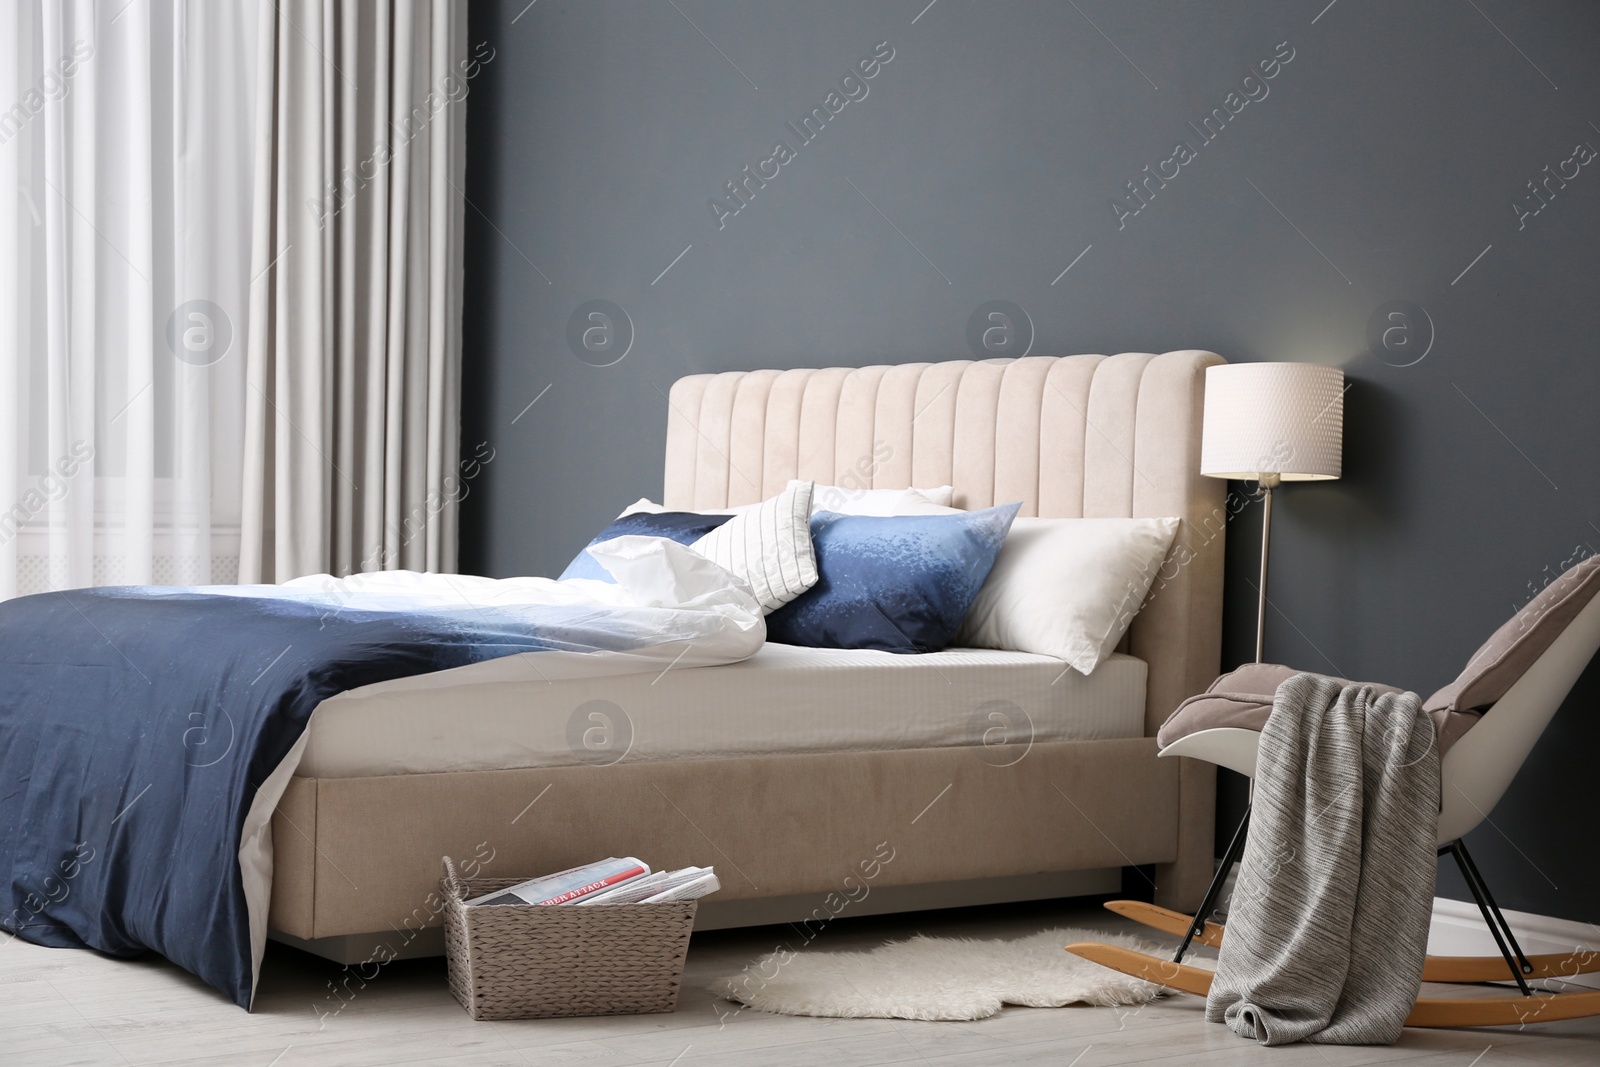 Photo of Comfortable bed with pillows and soft blanket in room. Stylish interior design